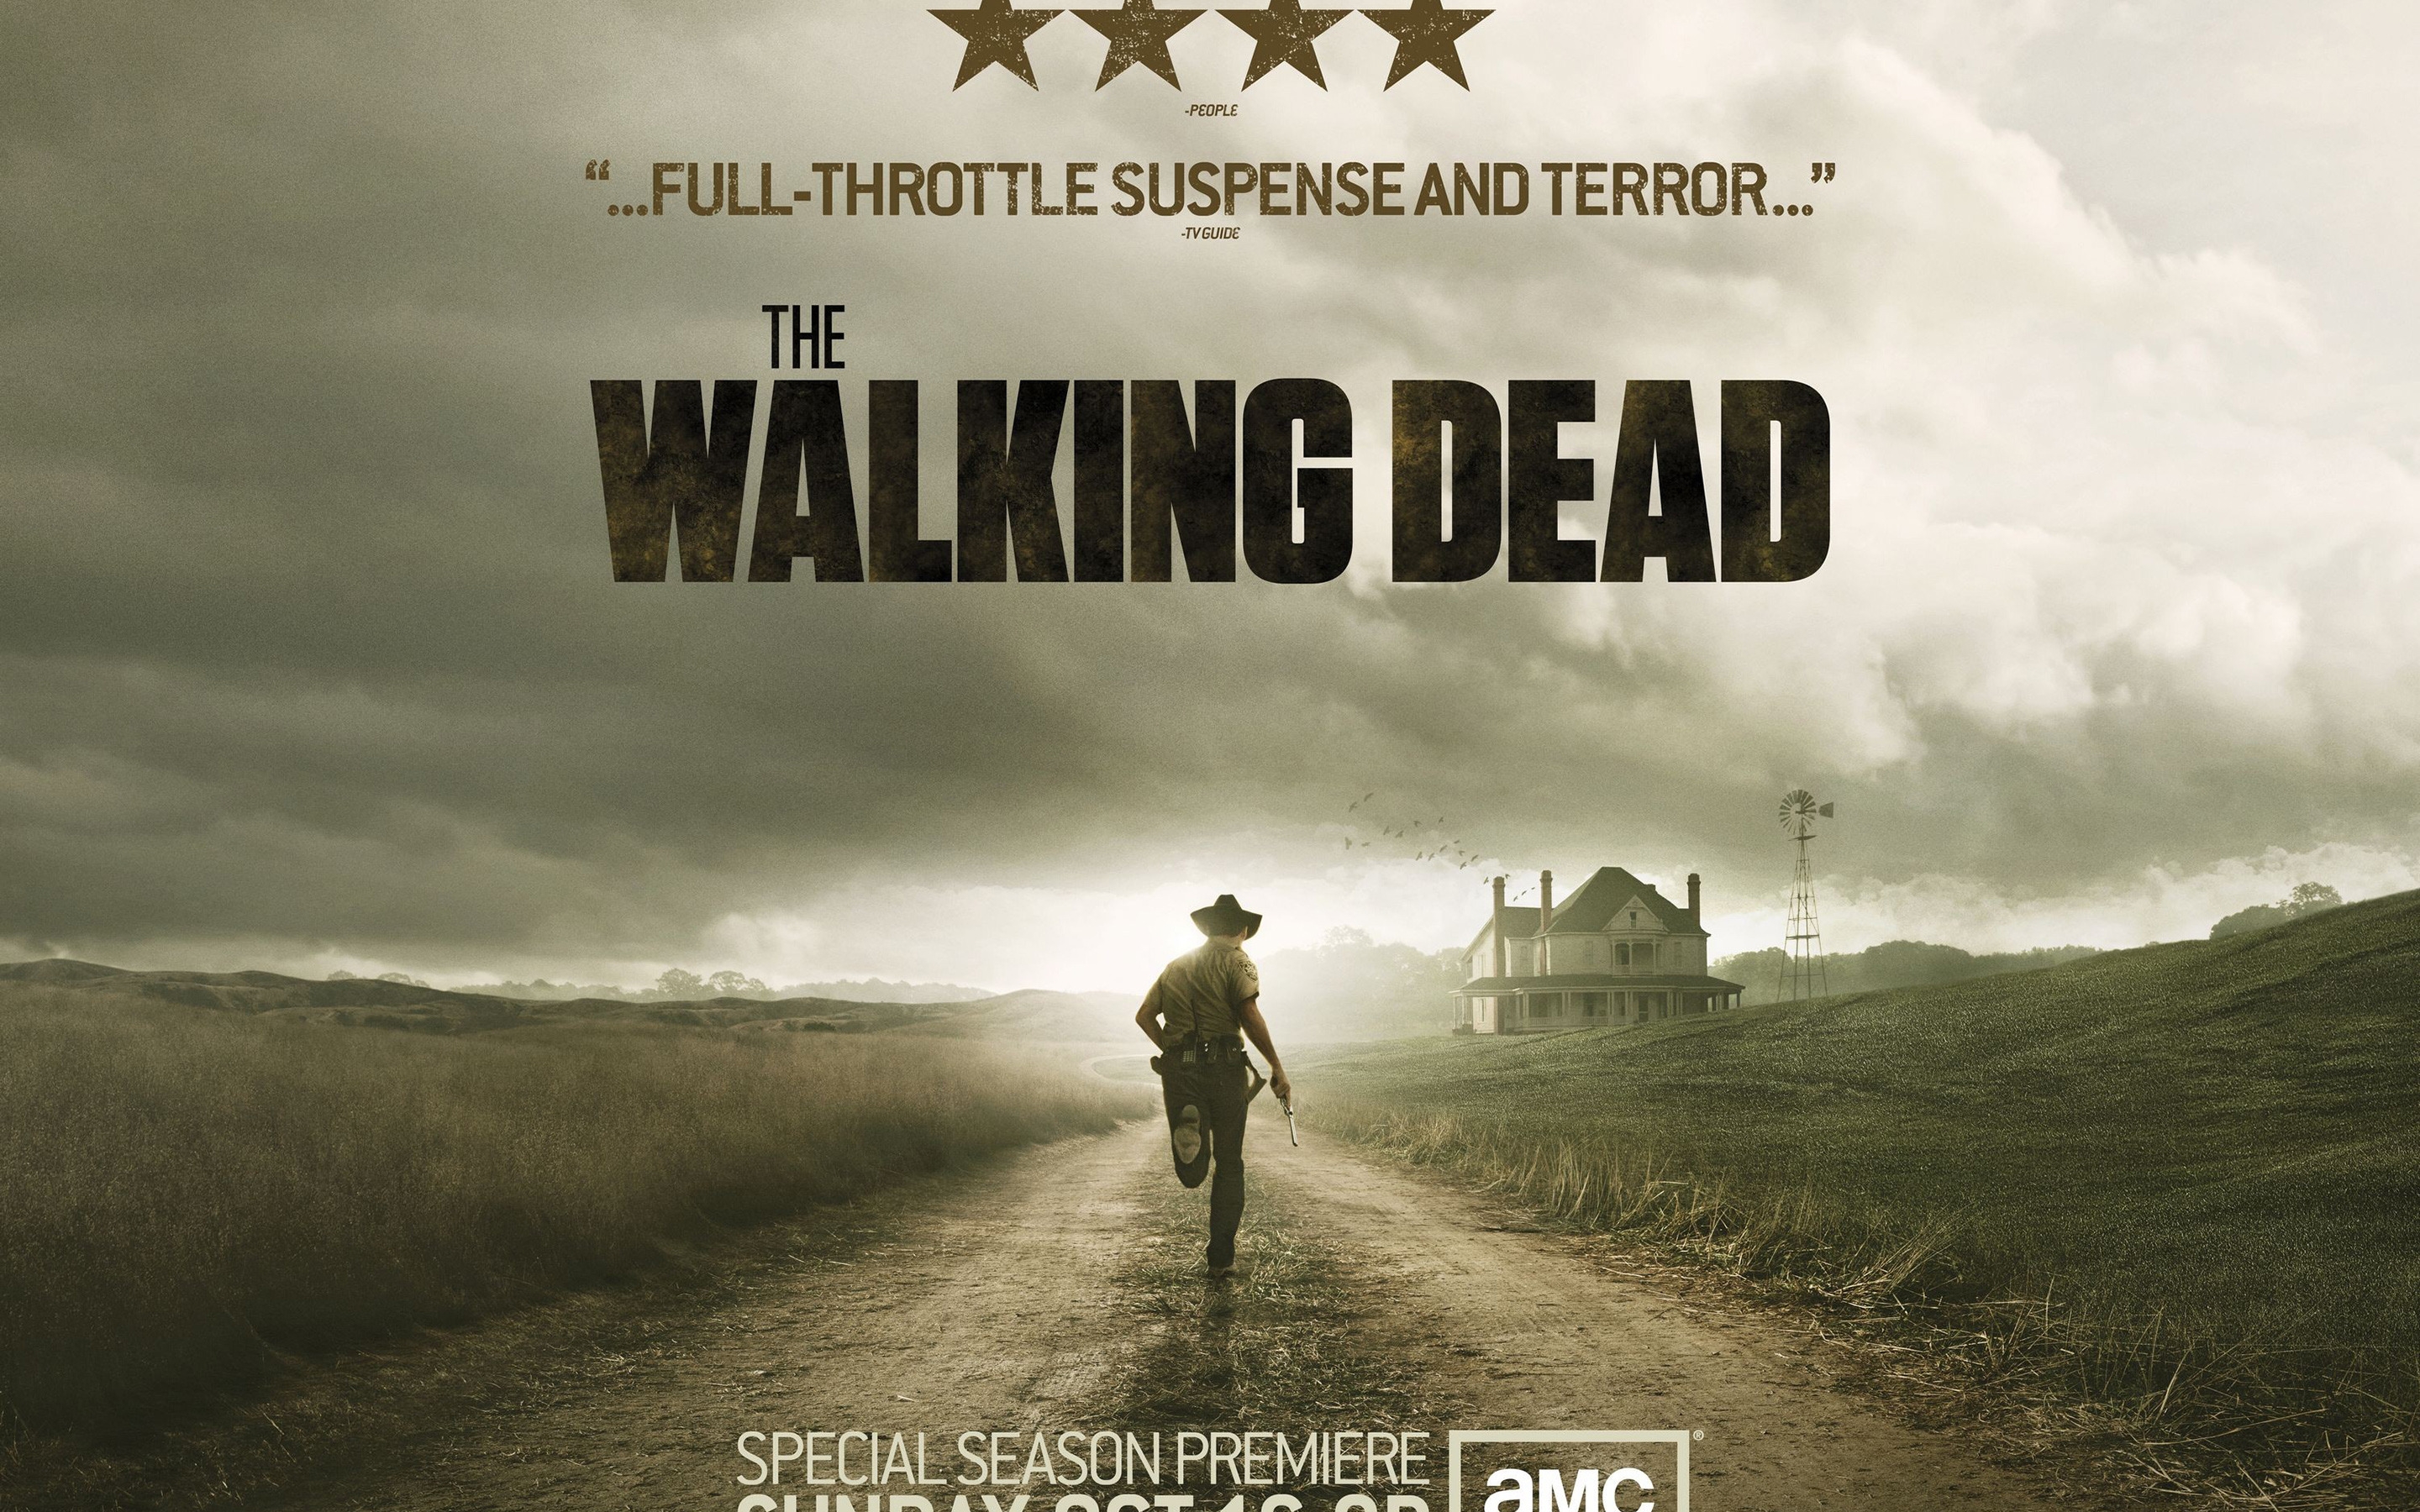 The Walking Dead Tv SHow for 2880 x 1800 Retina Display resolution